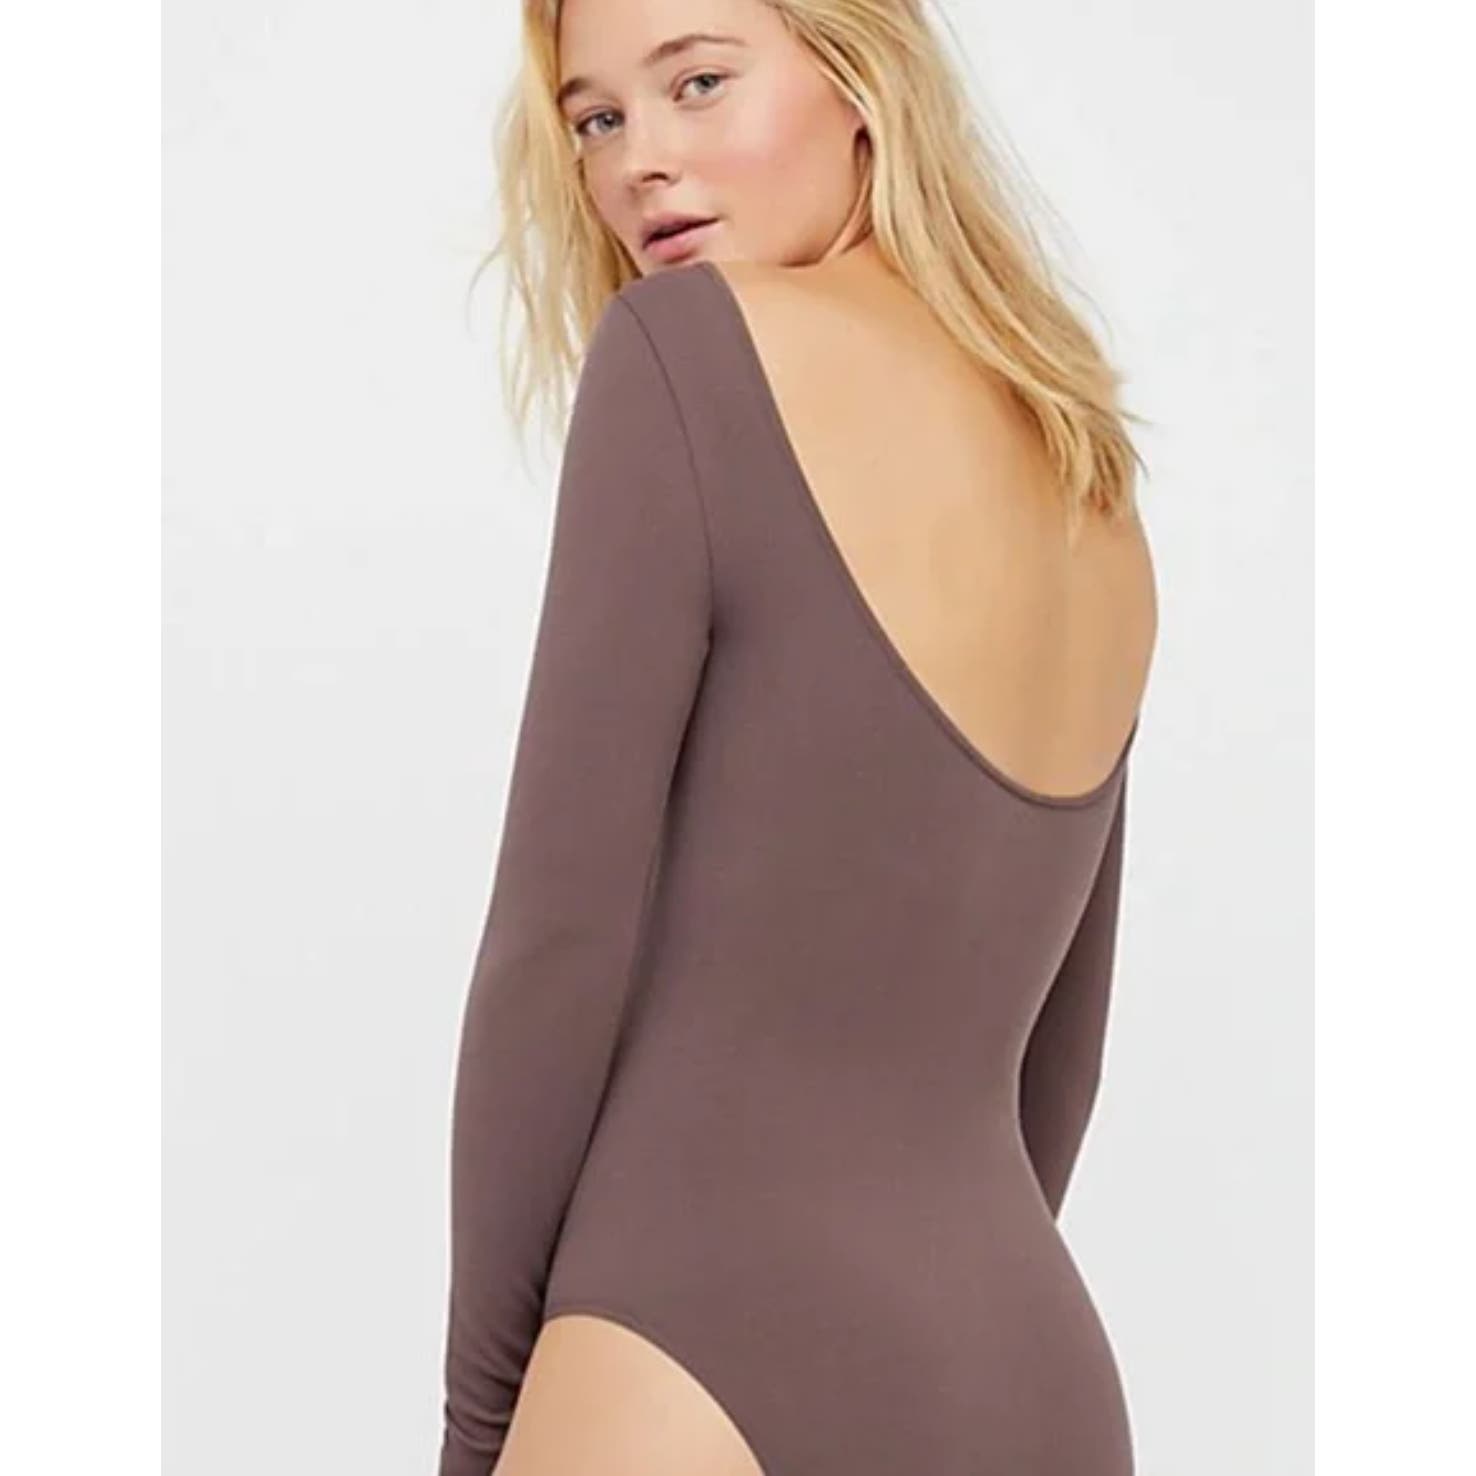 Free People NWOT Brown Seamless Long Sleeve low back bodysuit Size M/L